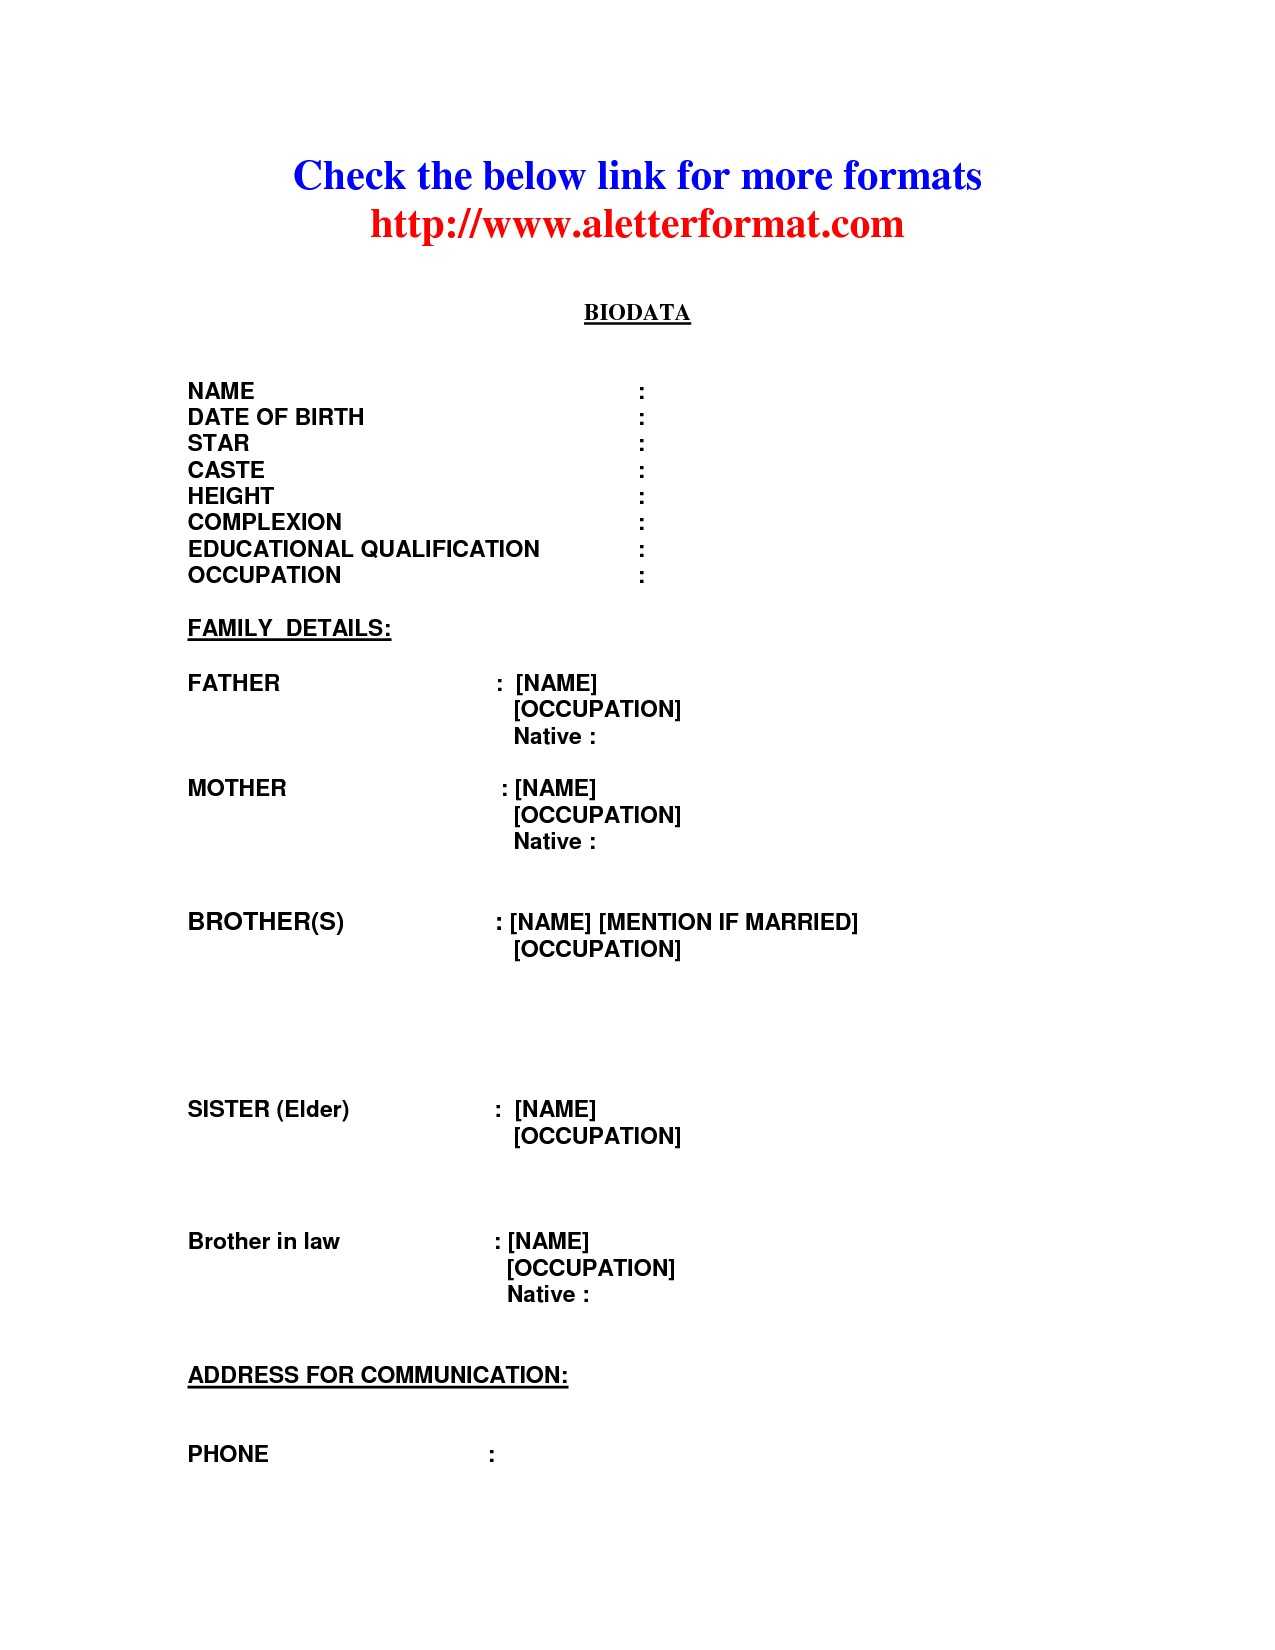 At Family Worksheets and Bio Data Sample for Job Best Debt Consolidation Spreadsheet or